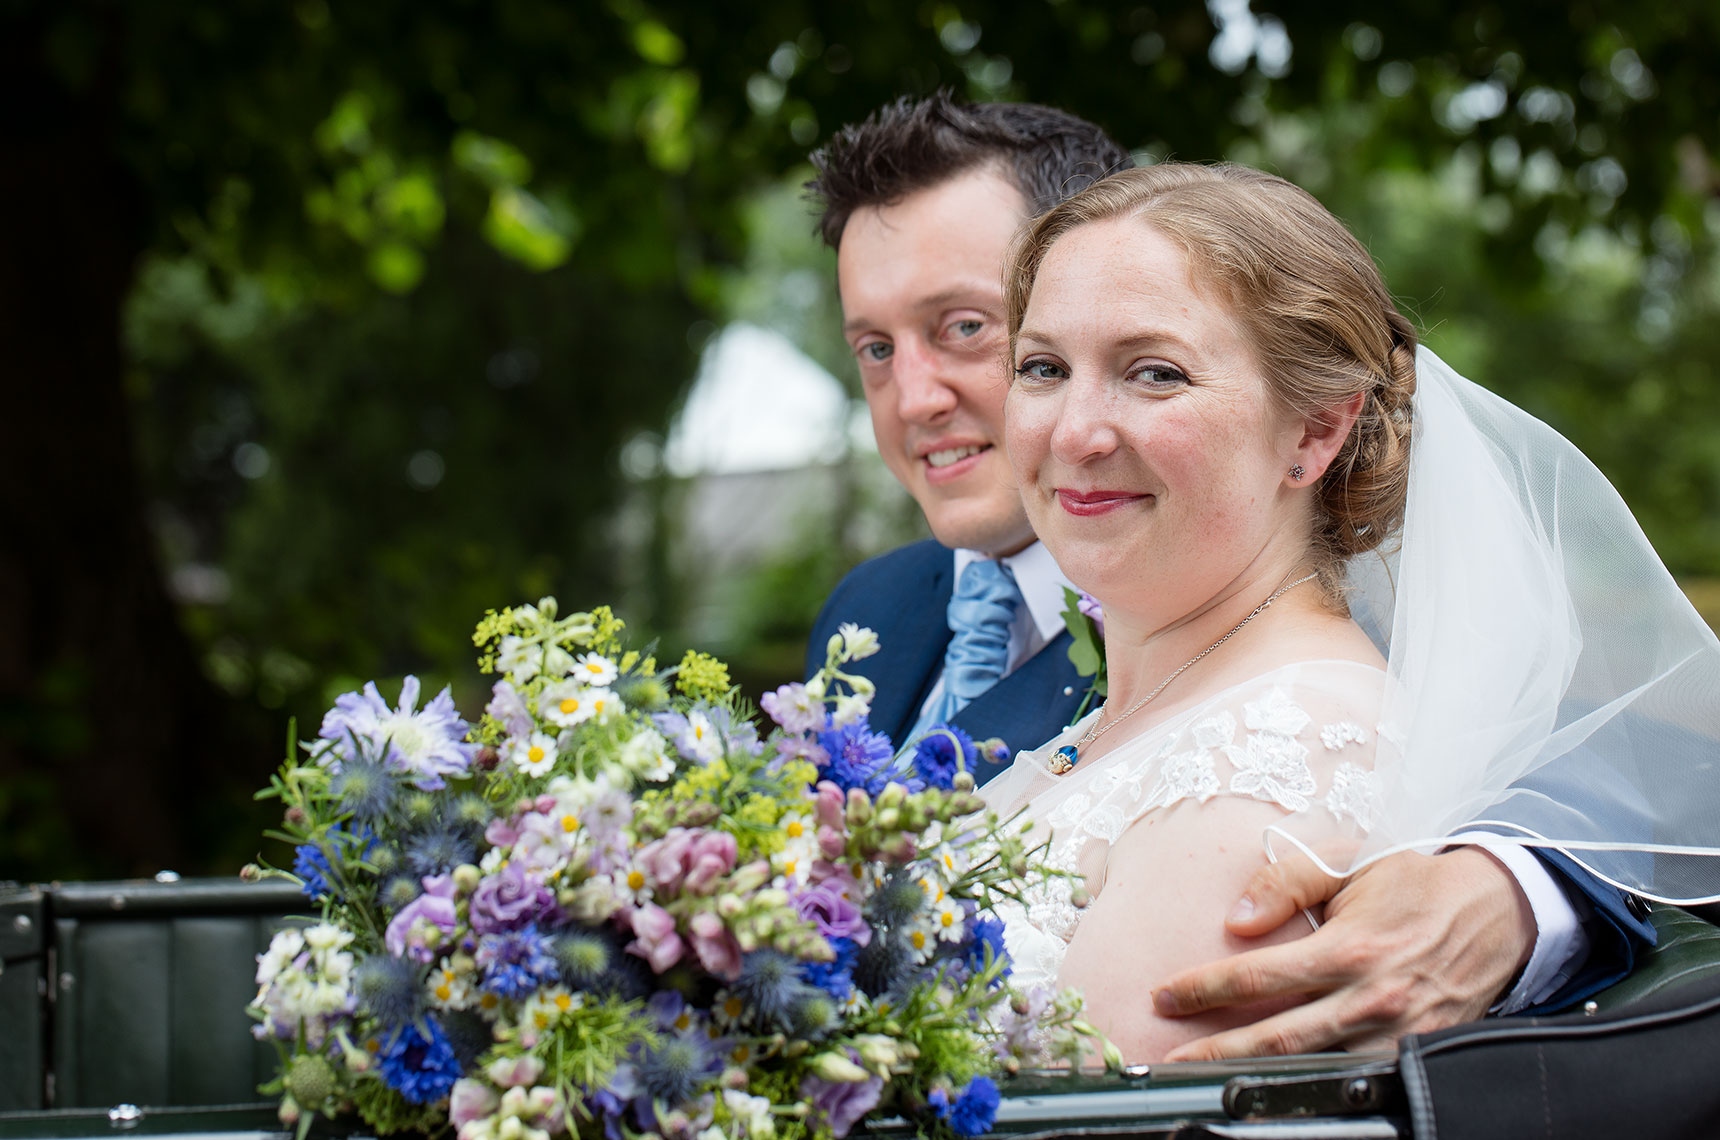 Bride and Groom cuddling in vintage car with bouquet of flowers